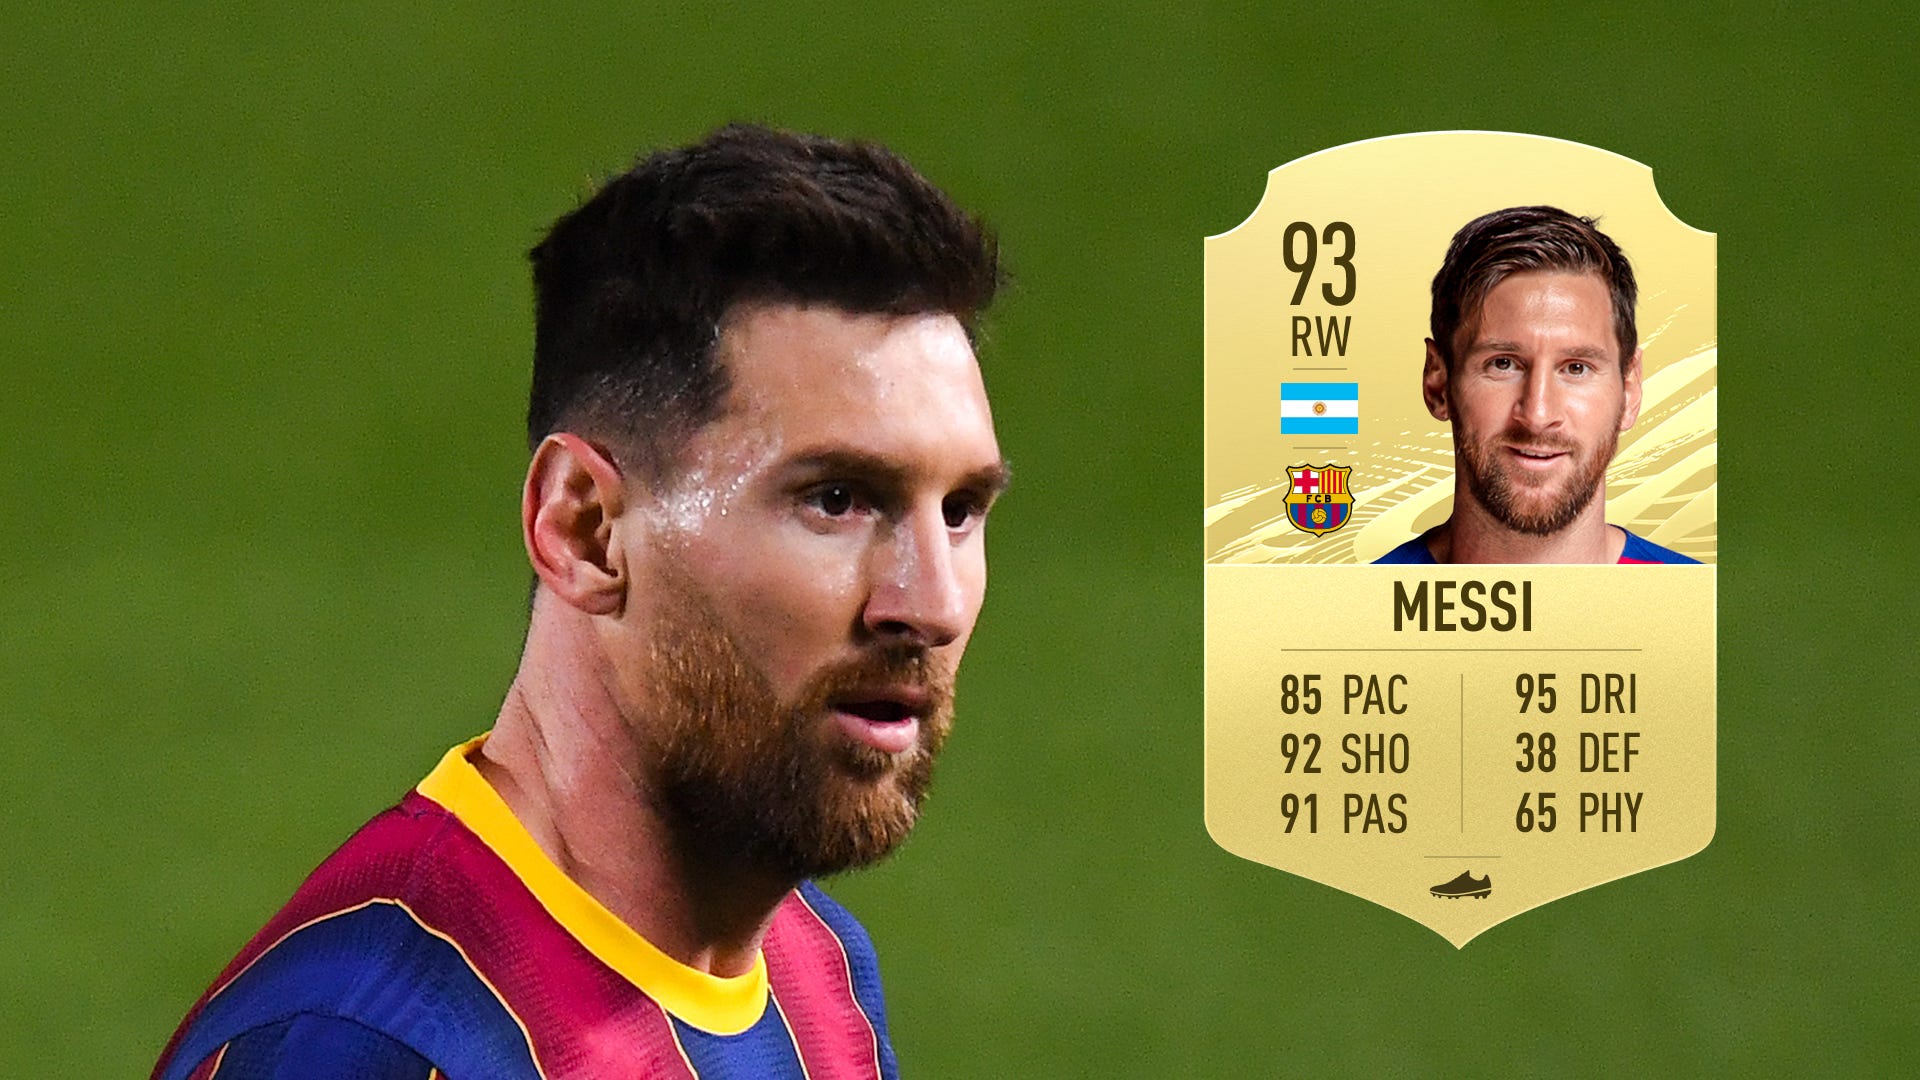 How much does it cost to sign Messi on FIFA 21?